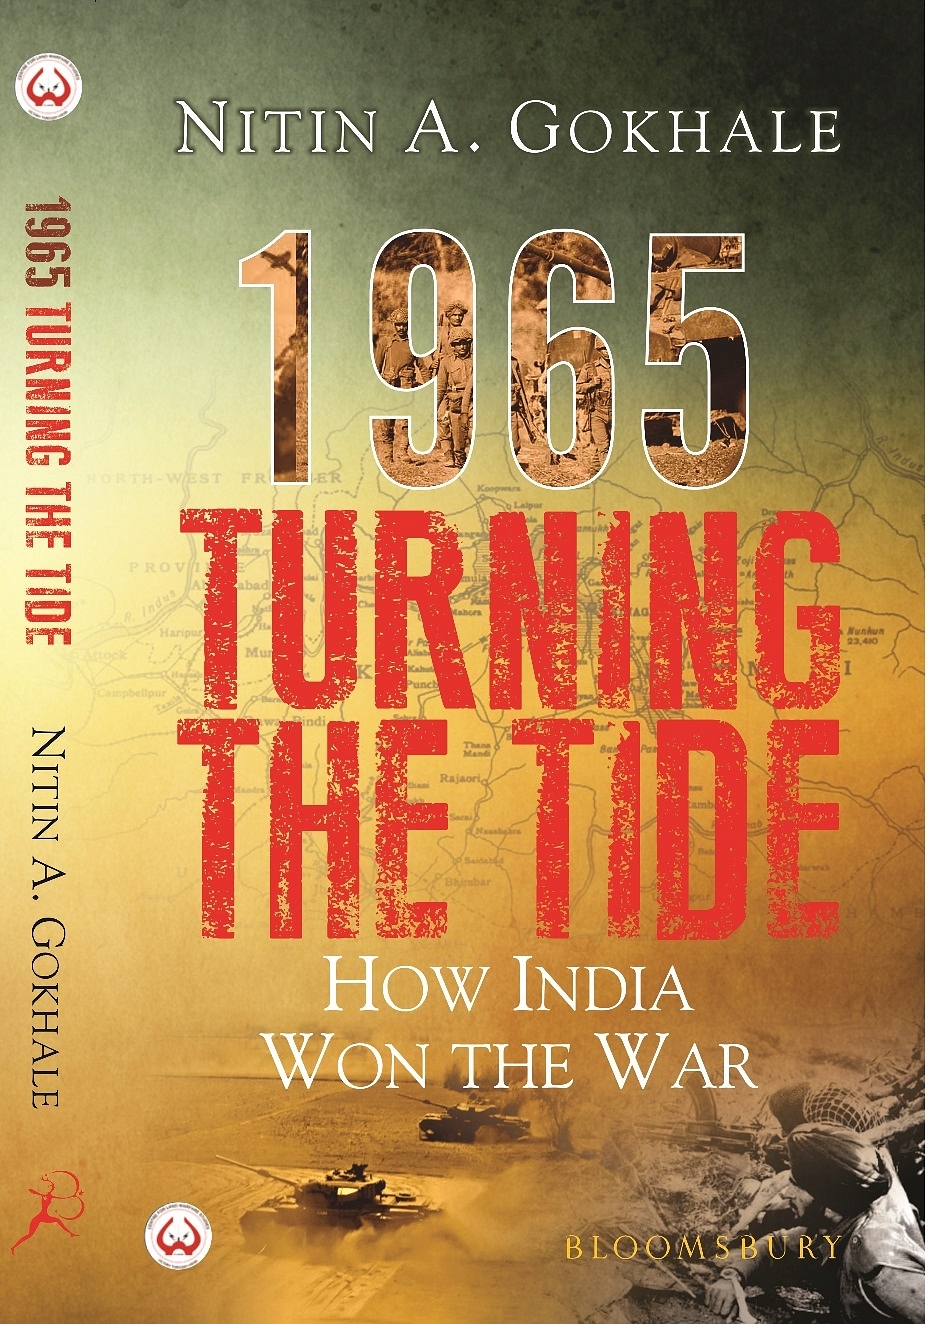 1965 Was Not A Stalemate - India Had Won The War